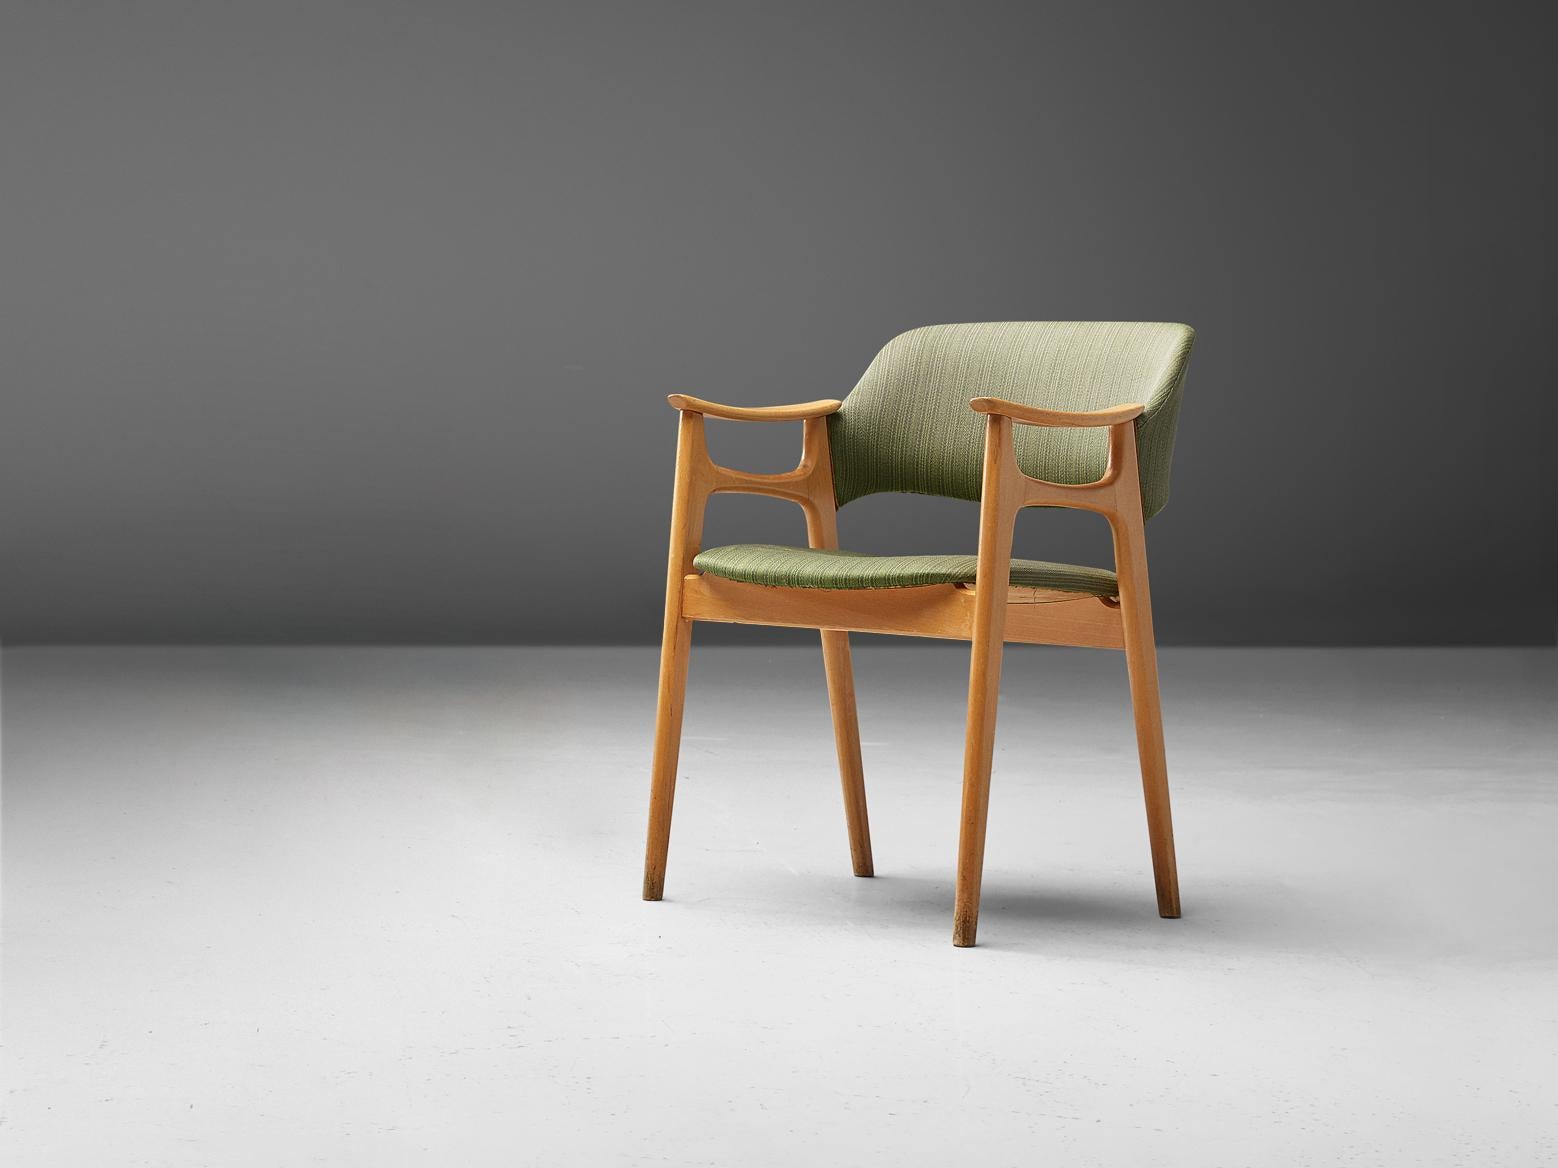 Dining chair, beech, fabric, Norway, 1960s

This Norwegian elegant dining chair shows beautiful lines and stunning wood connections. The visually almost floating seat with the well-sized back, provide great comfort. The natural grain of the beech is